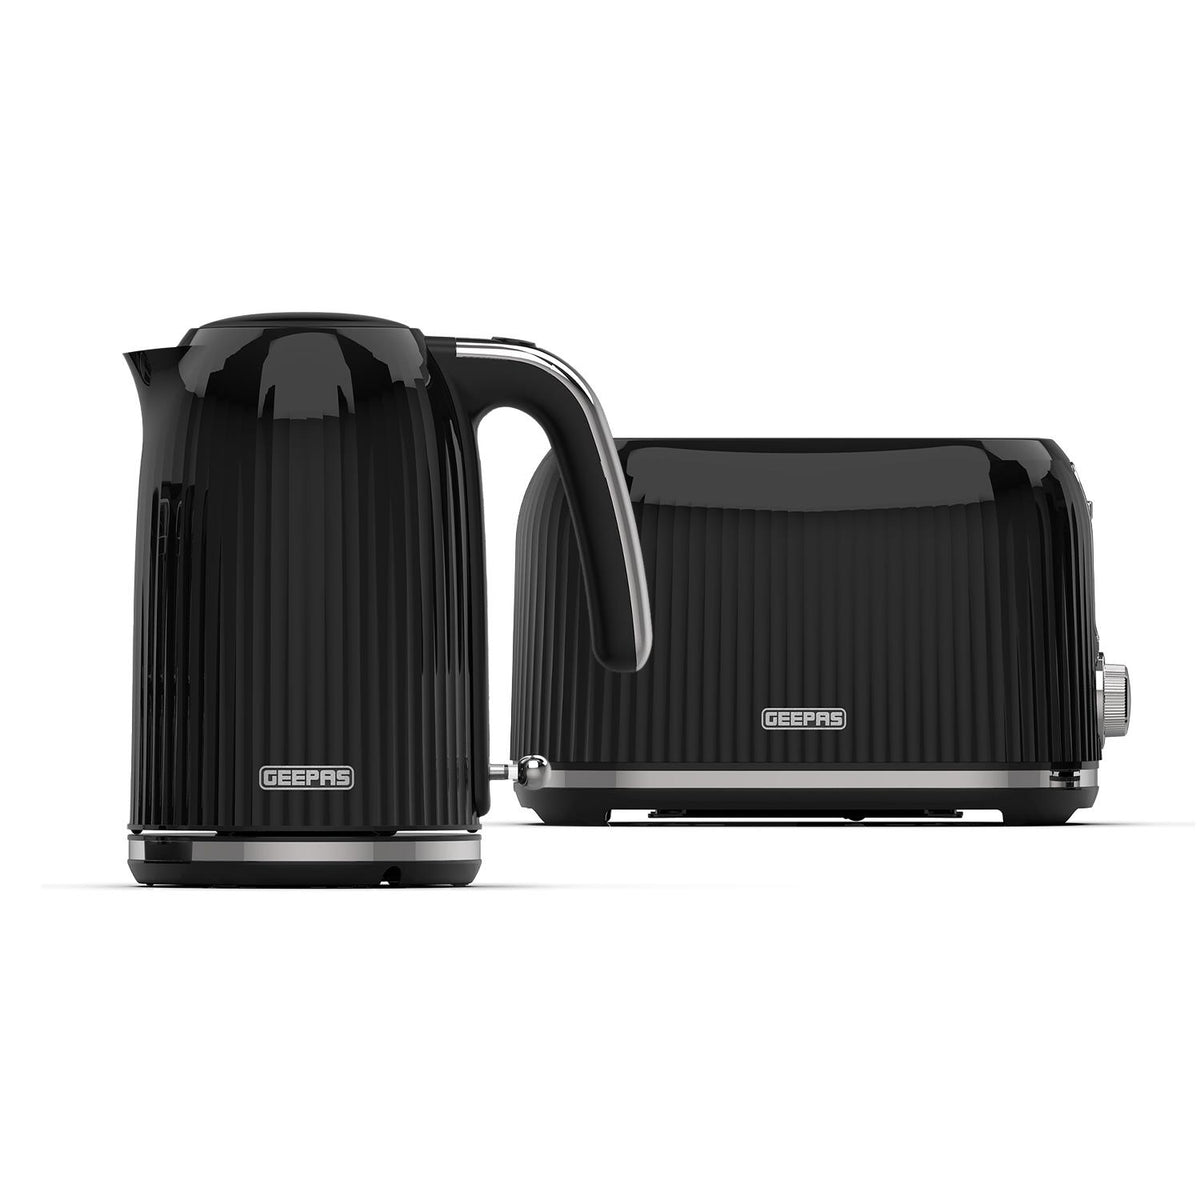 Fluted 1.7L Electric Kettle & Two-Slice Toaster In Black